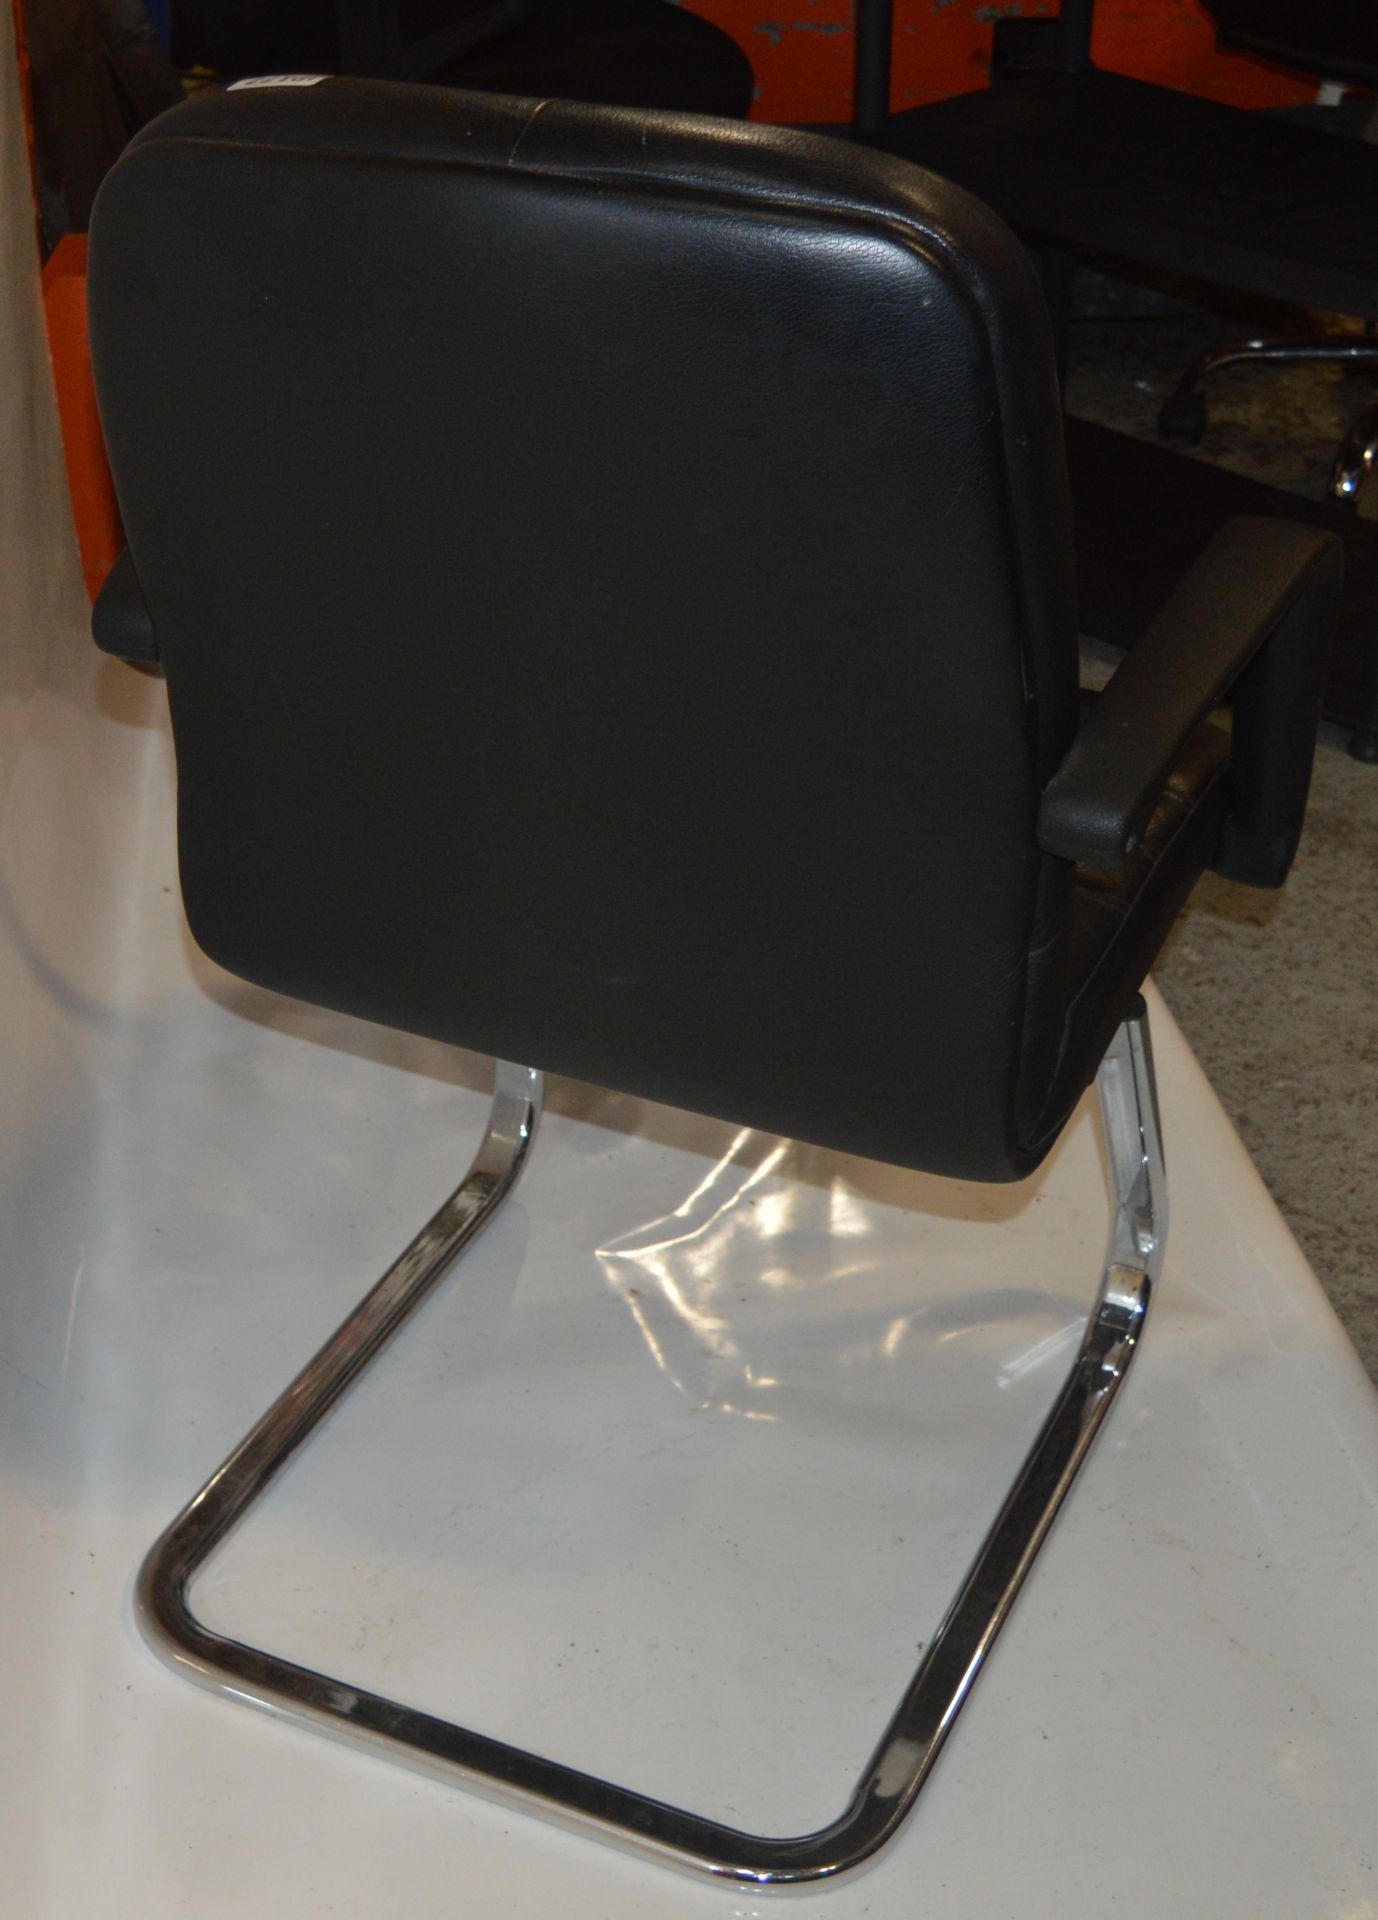 1 x Black Leather Office Chair With Chrome Base - Ref JP177 - Removed From Office Environment - - Image 4 of 4